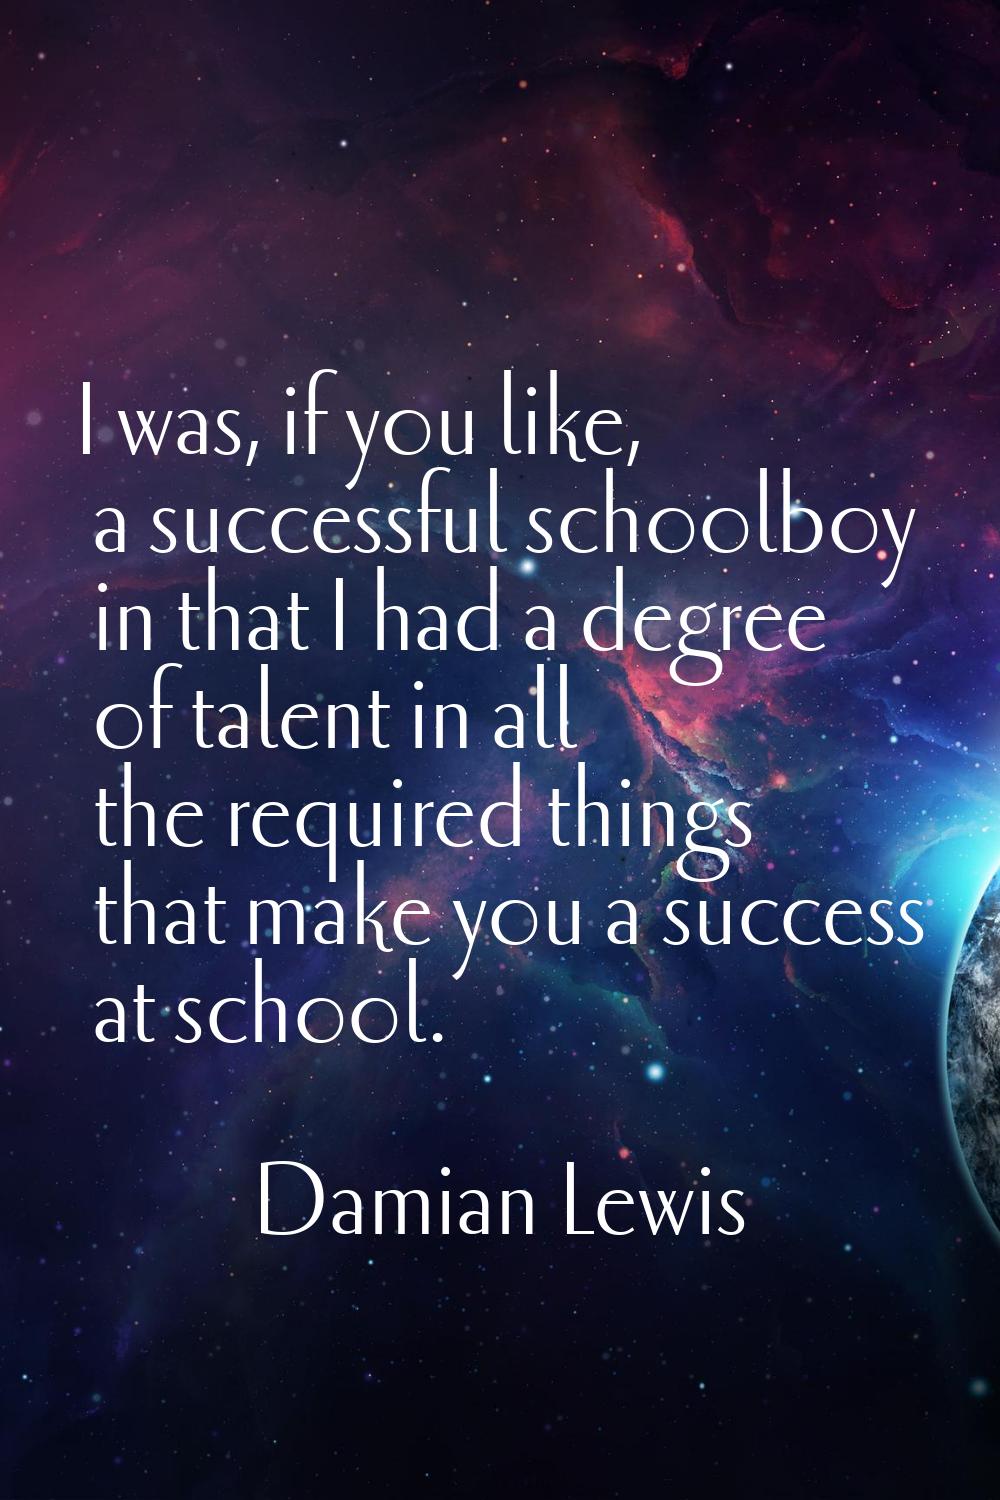 I was, if you like, a successful schoolboy in that I had a degree of talent in all the required thi